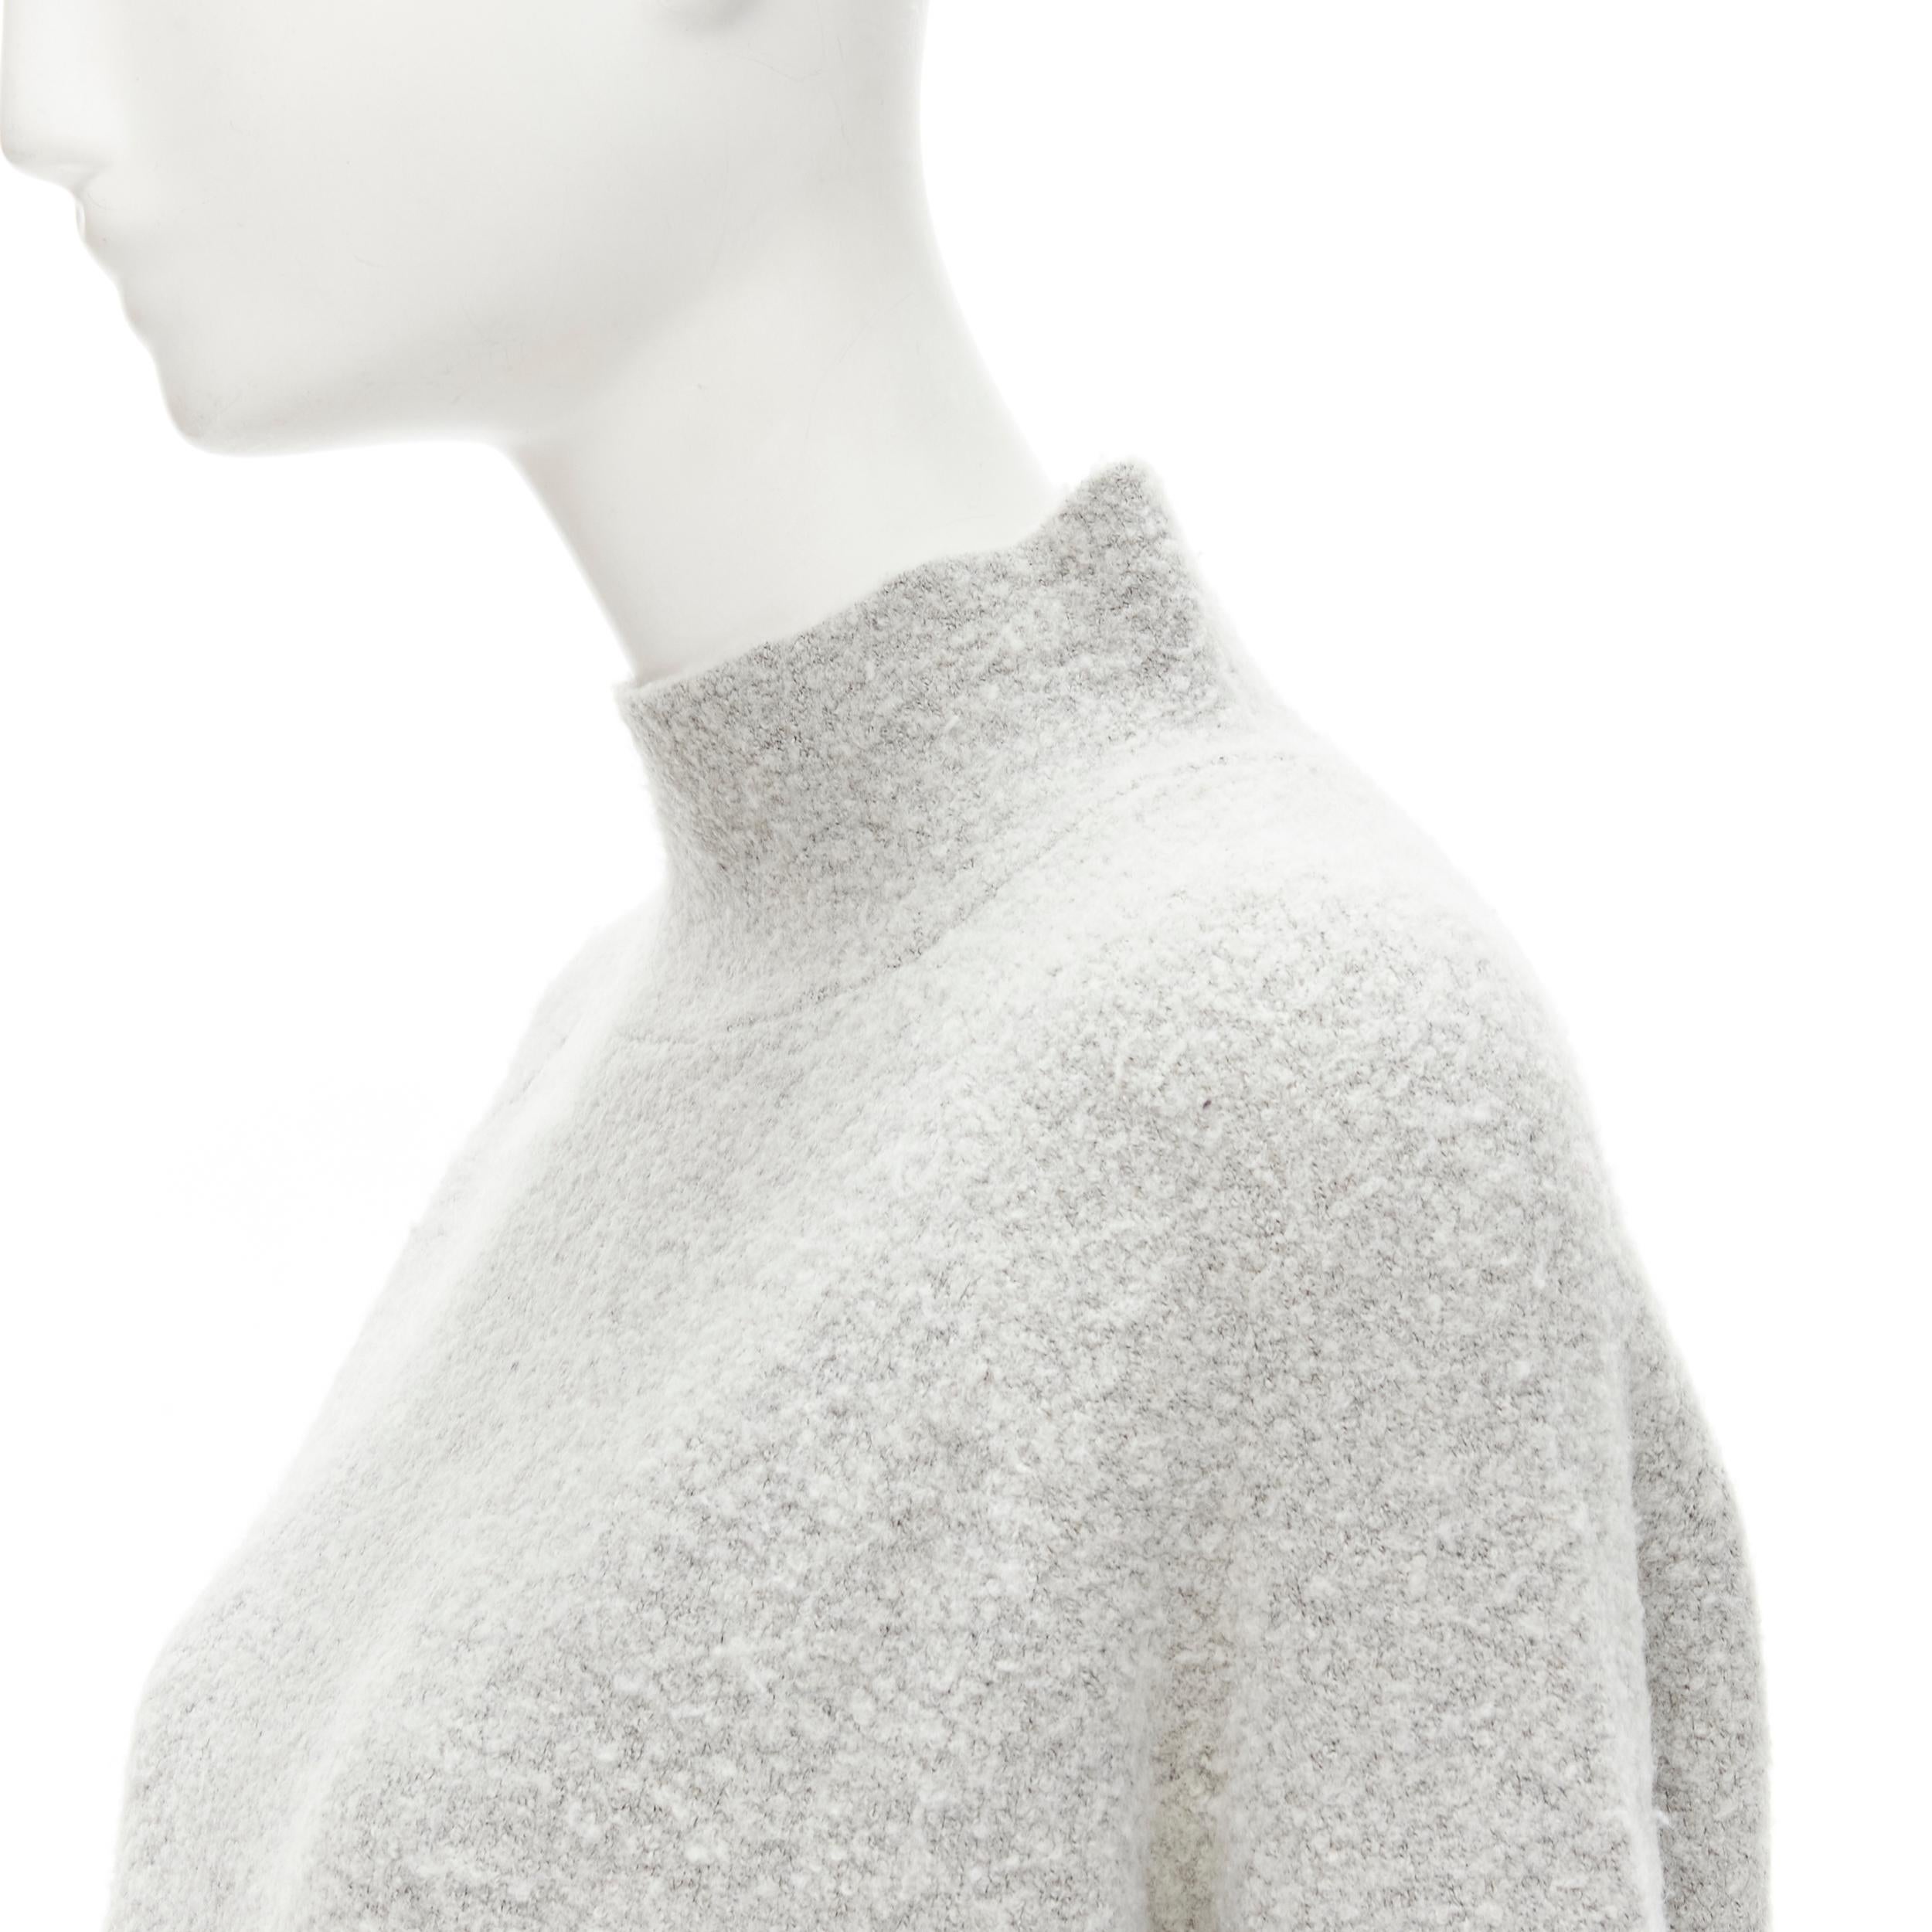 THEORY grey wool blend fuzzy stand collar step hem sweater XS
Brand: Theory
Material: Wool
Color: Grey
Pattern: Solid
Extra Detail: Stand collar. Raglan sleeve. High low step hem.
Made in: China

CONDITION:
Condition: Excellent, this item was